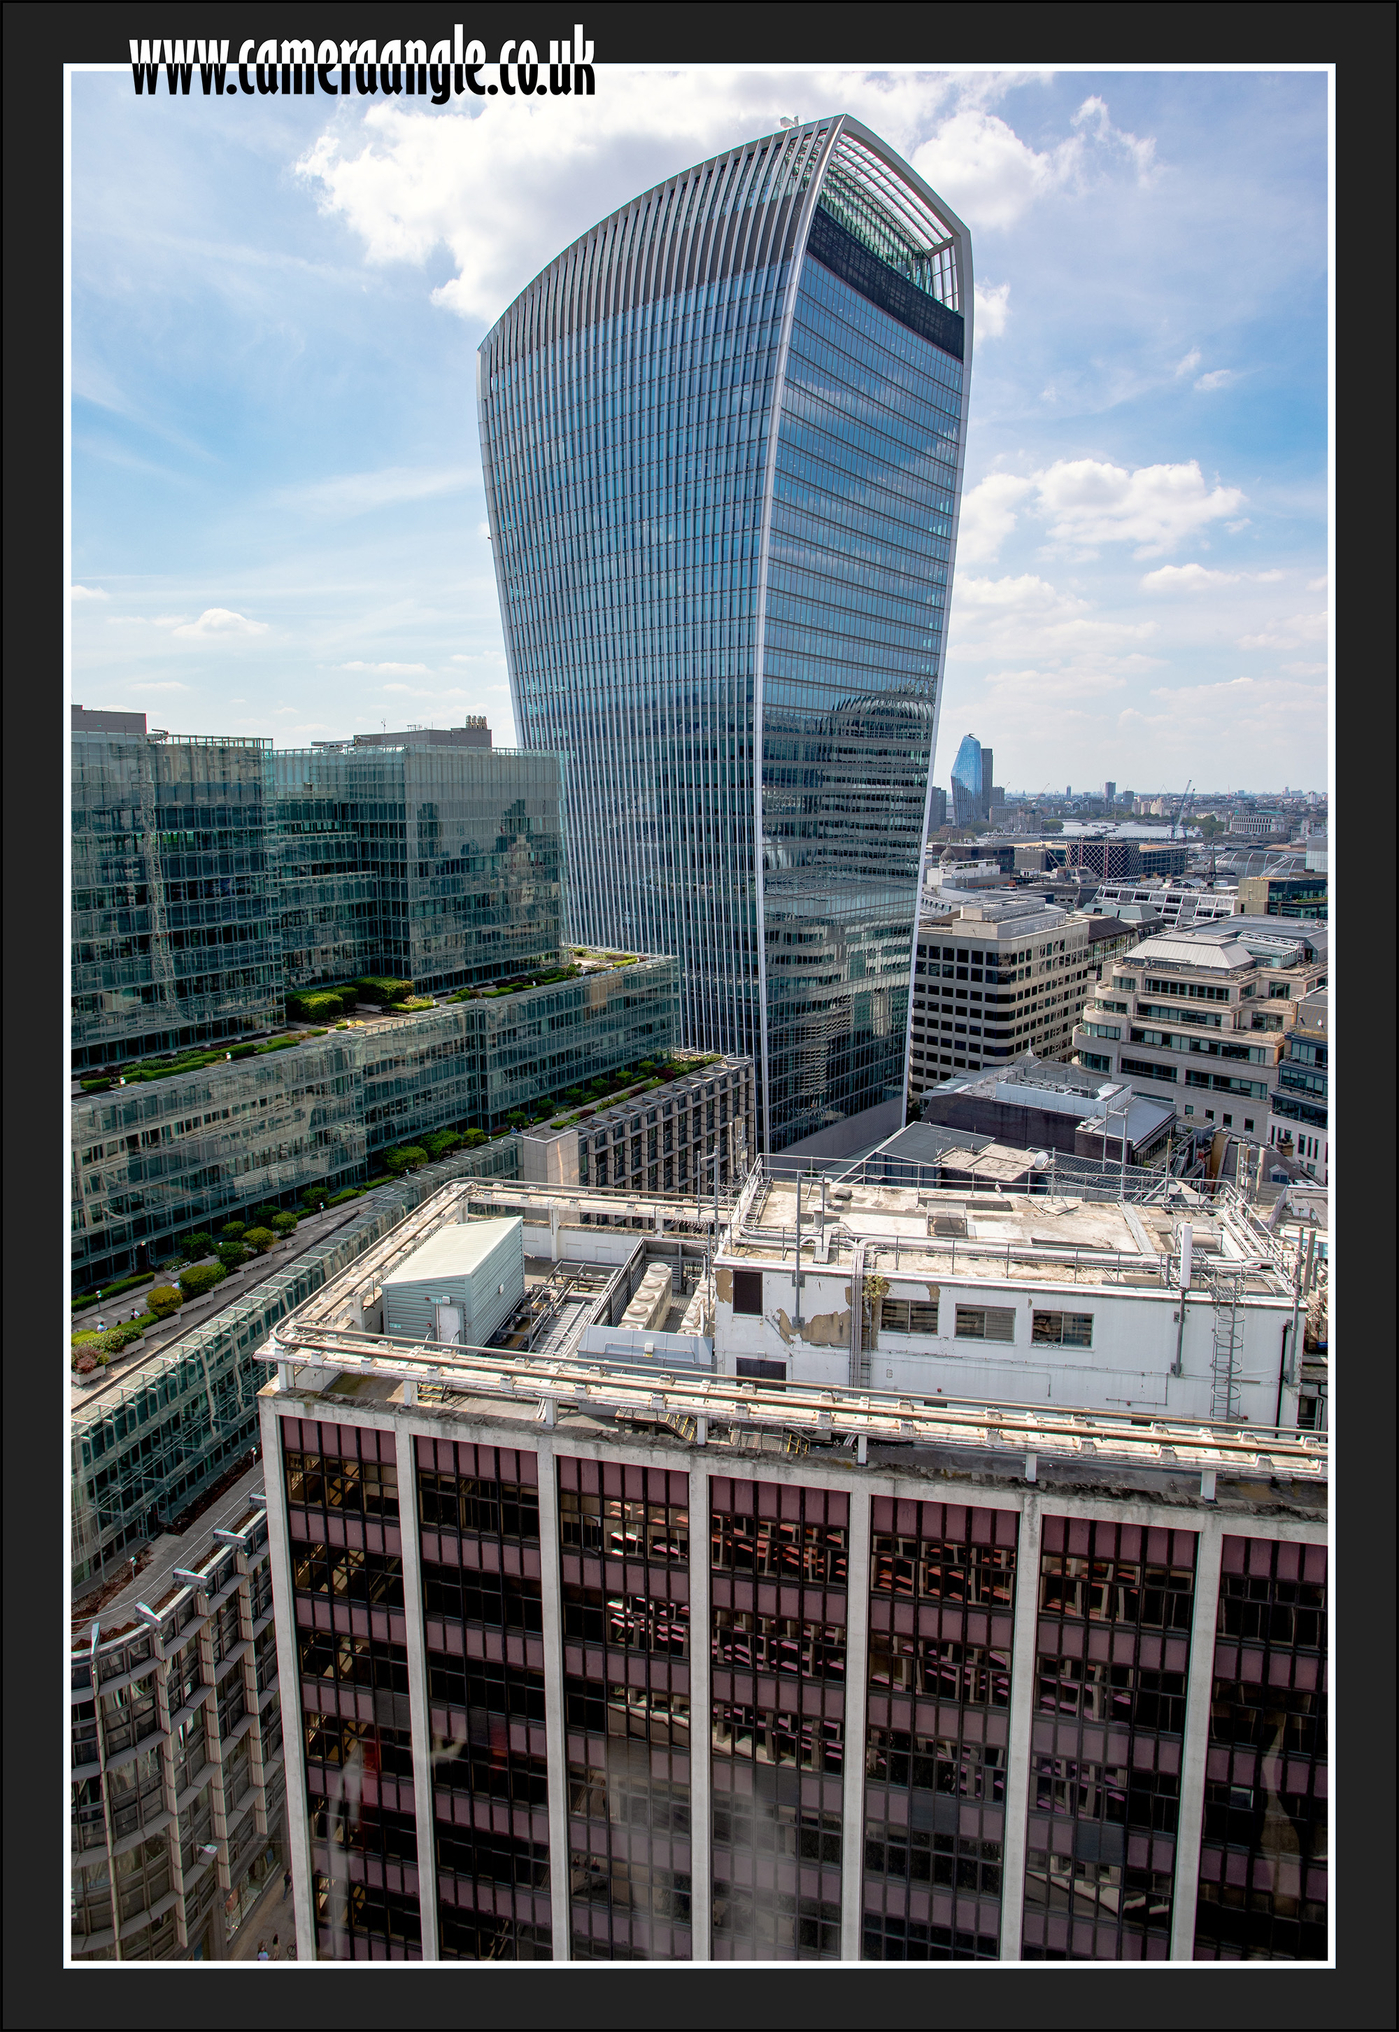 The Walkie Talkie London
Taken from the top of The Garden at 120
Keywords: The Walkie Talkie London